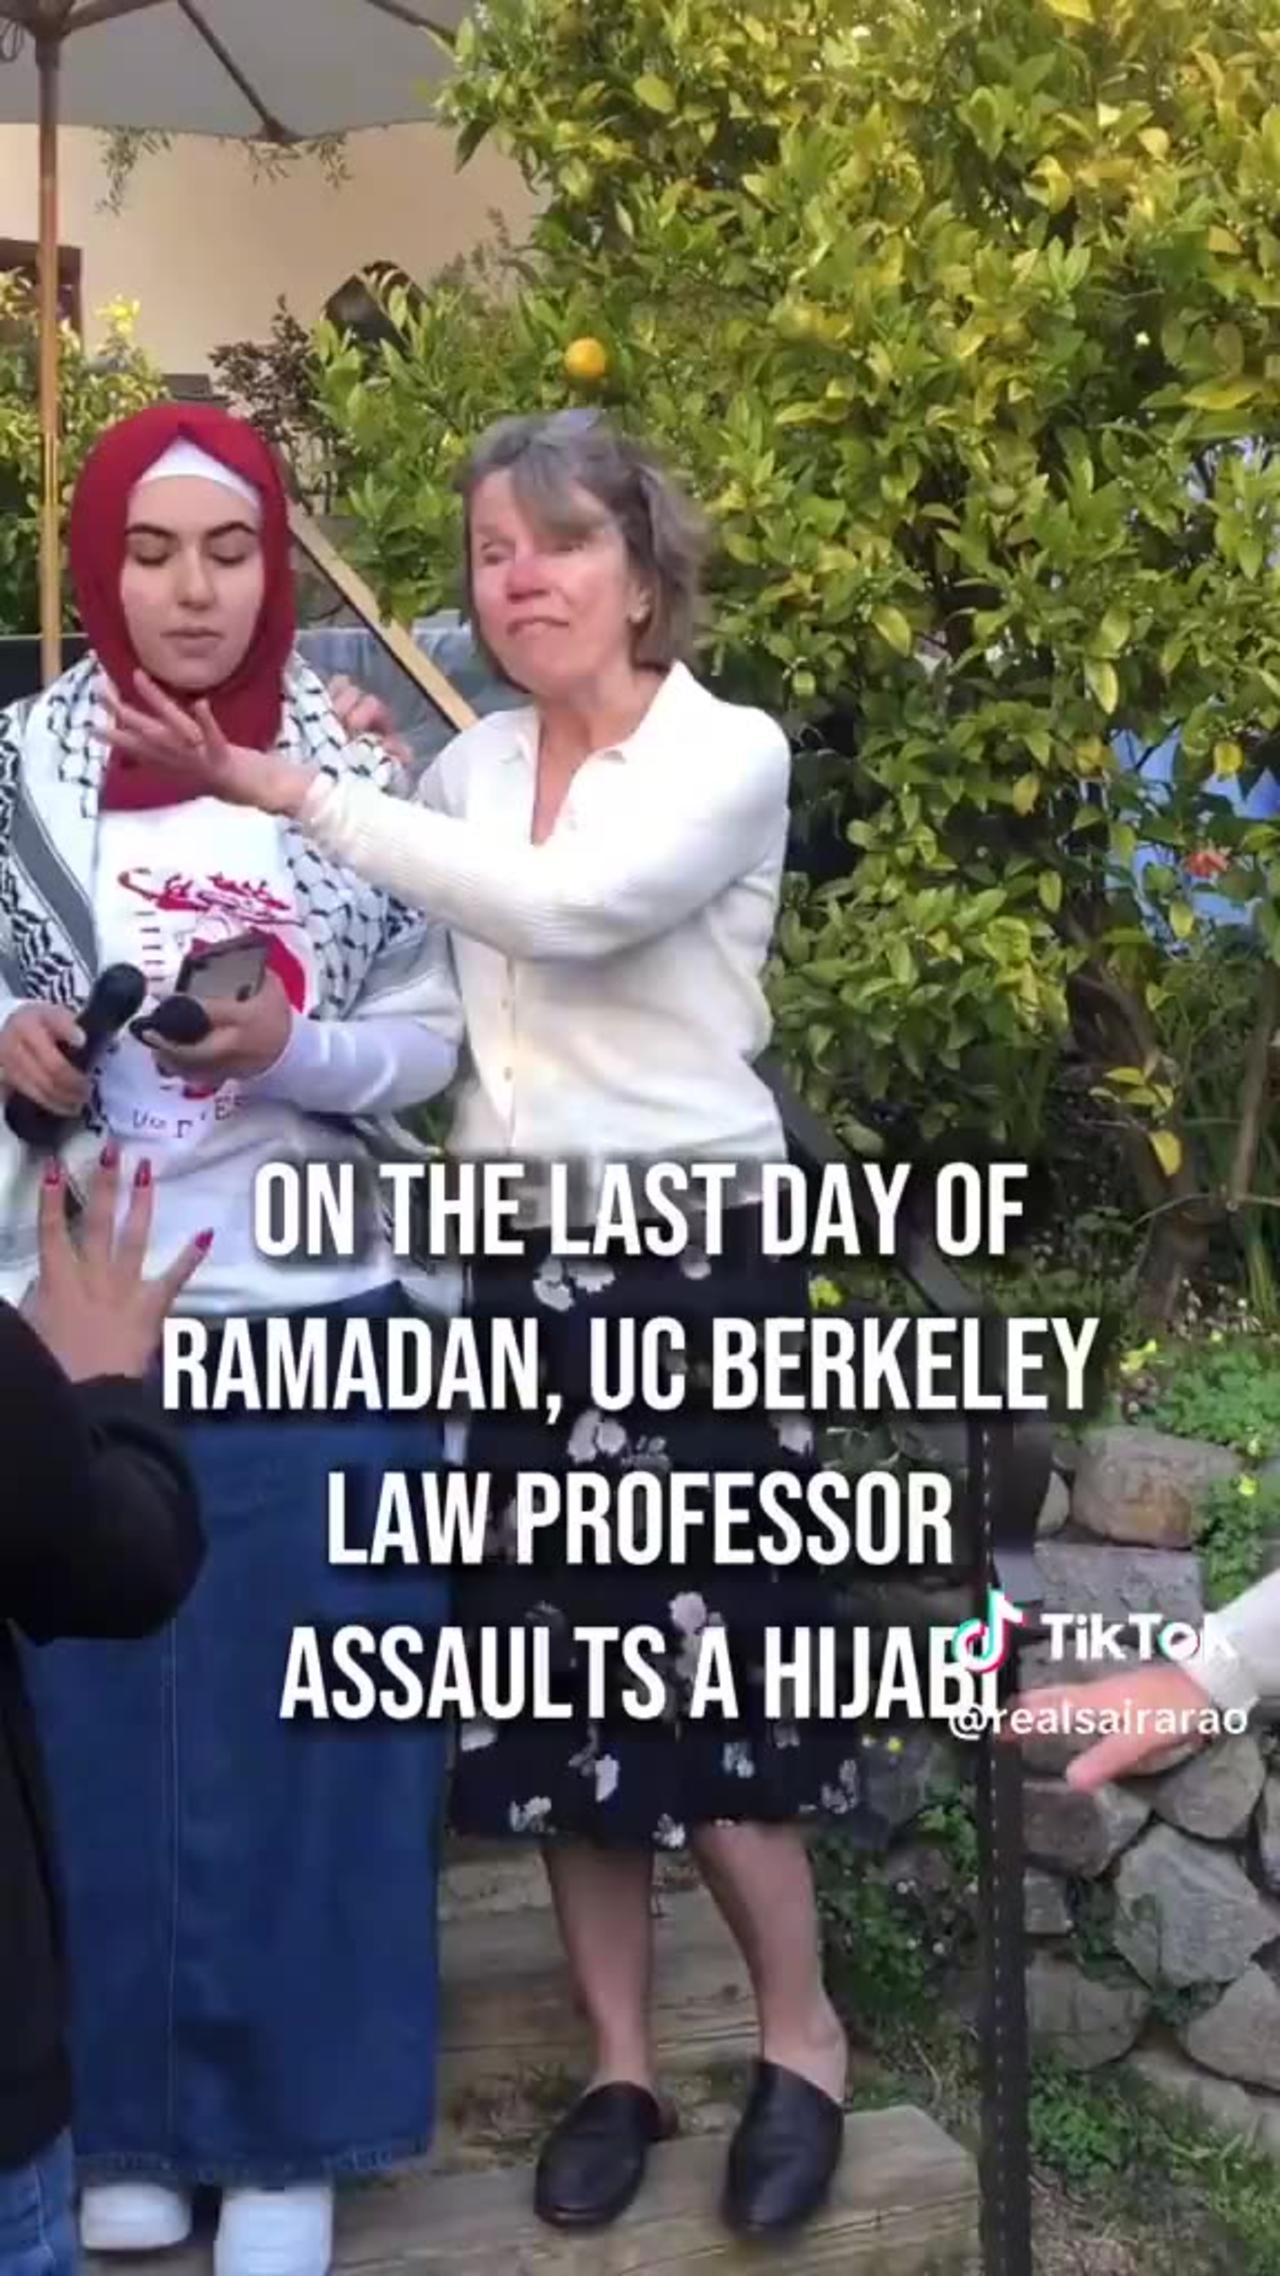 Protest Group Claims Professor Placed Muslim Student In A Chokehold